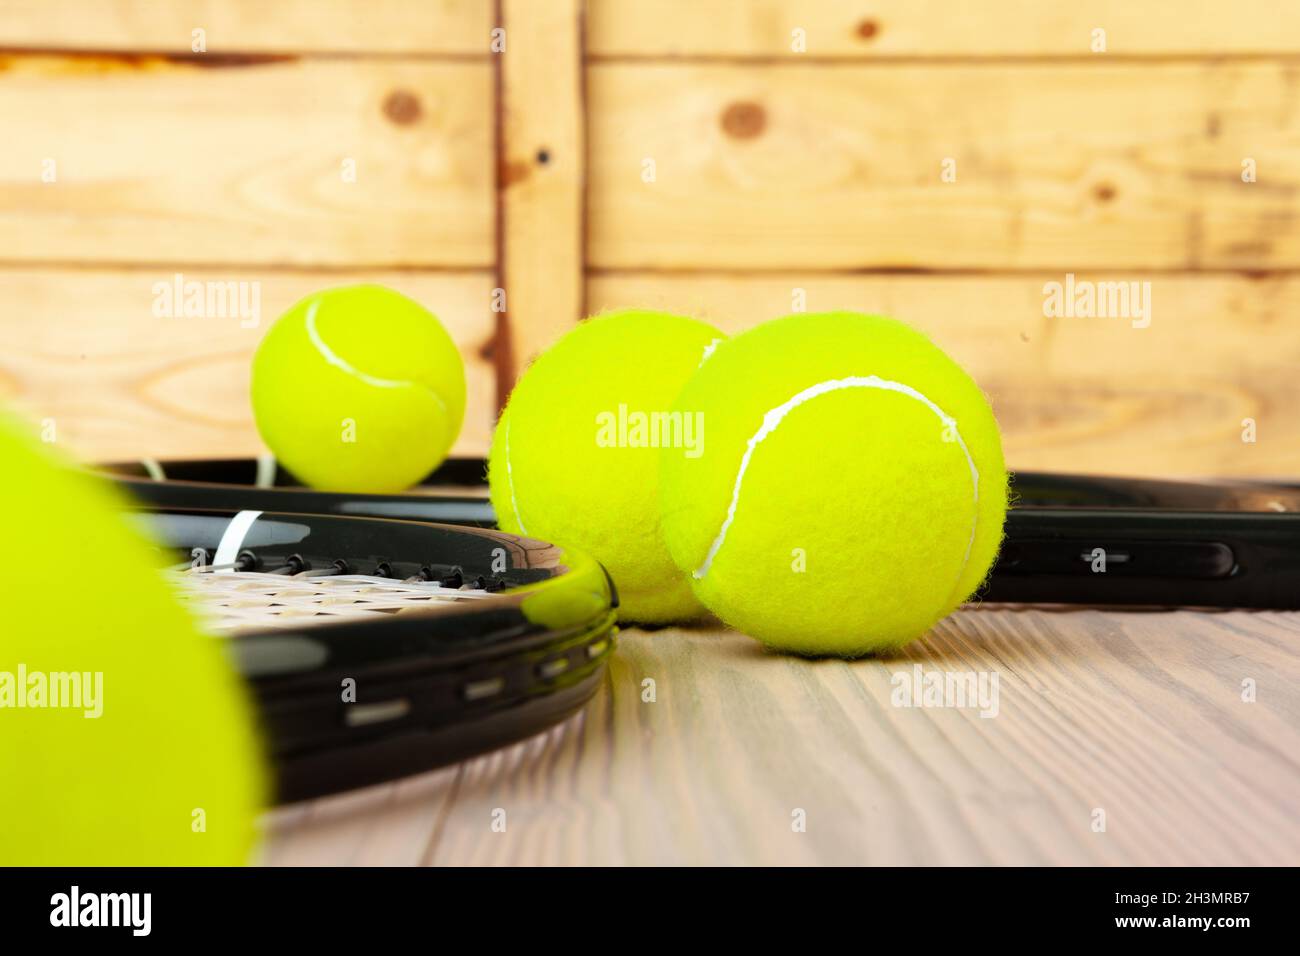 Tennis equipment on wooden surface close up Stock Photo